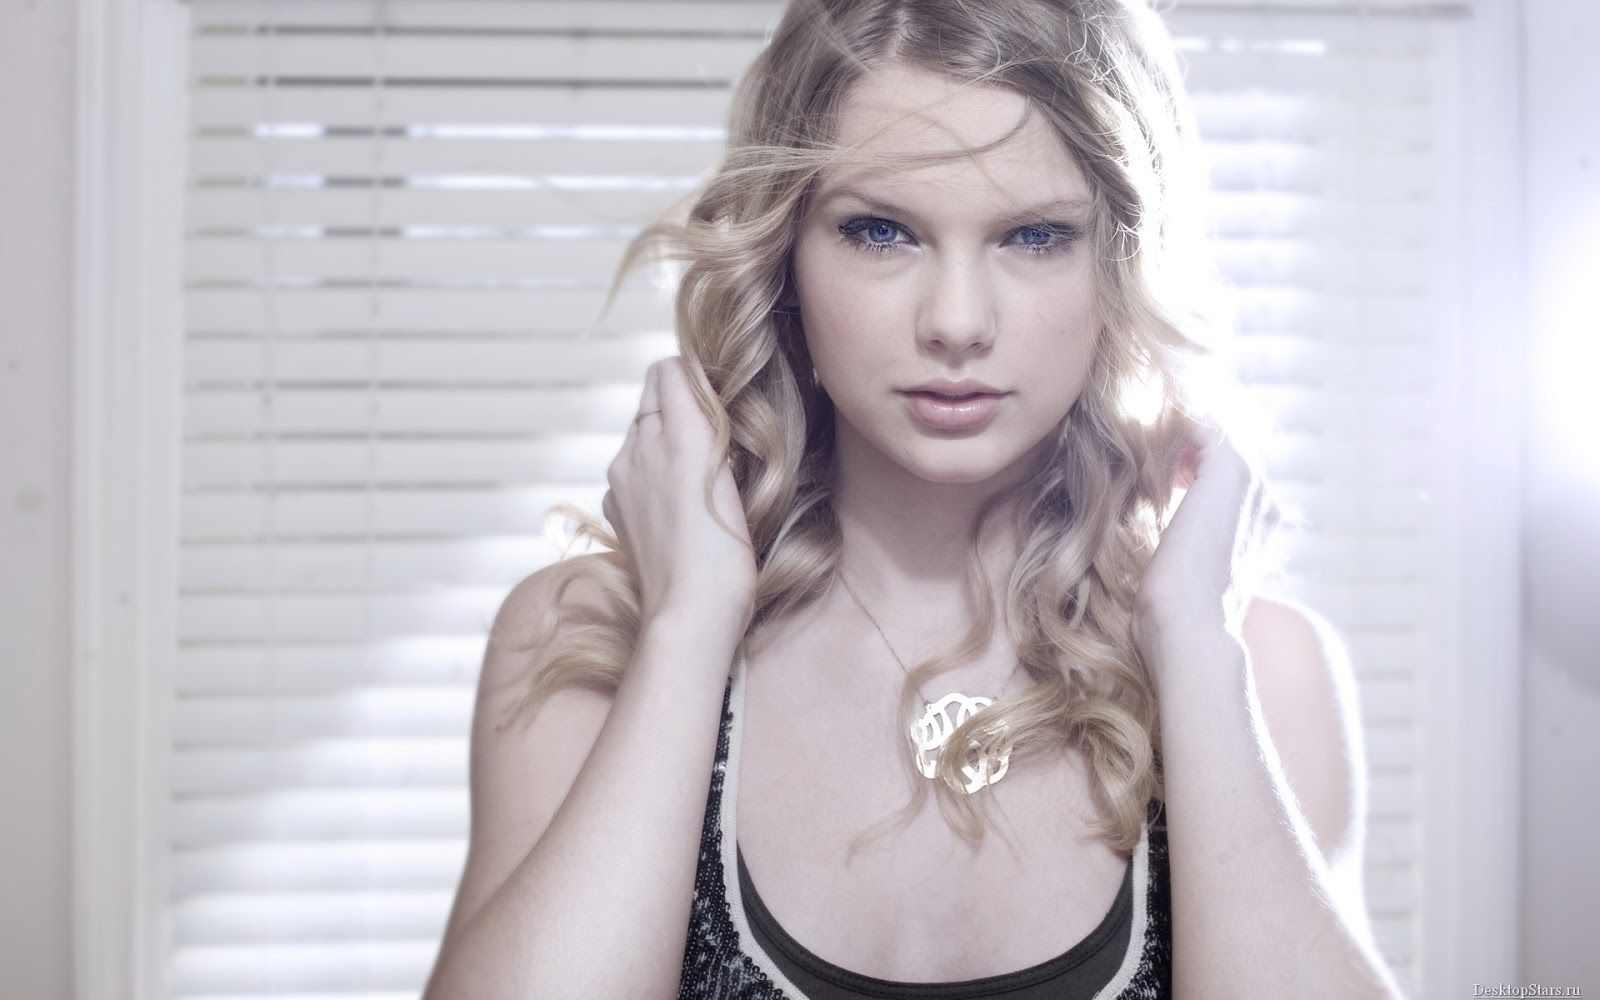 Taylor Swift singer Wallpaper | Wallpapers, Backgrounds, Images ...